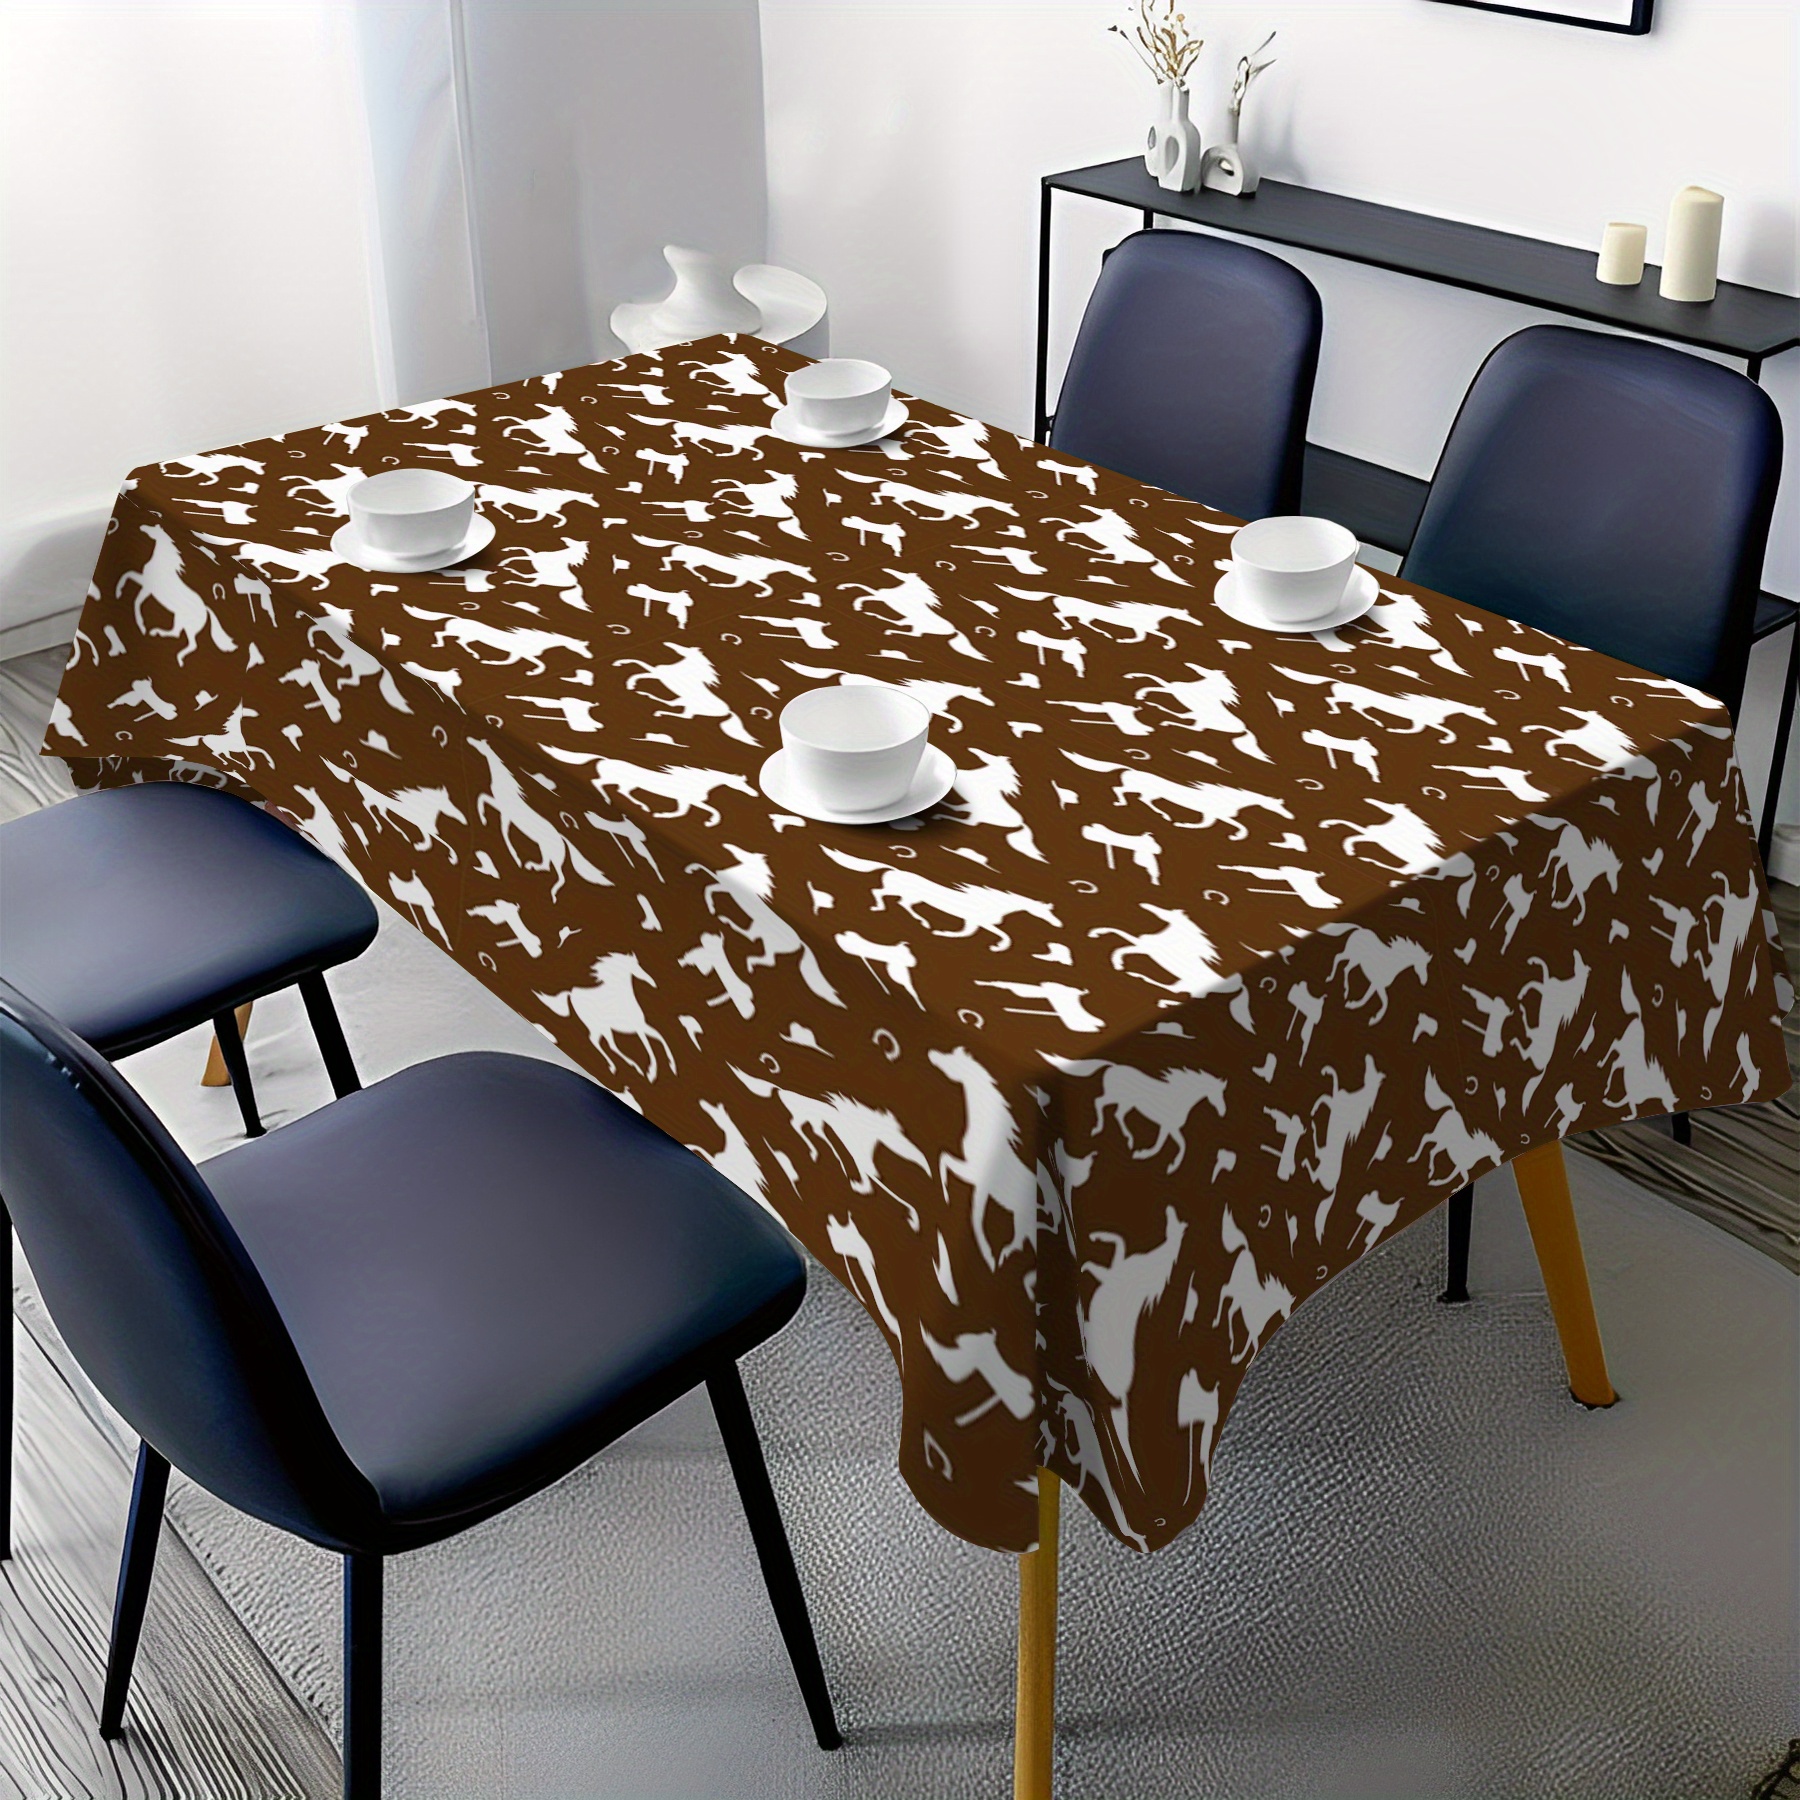 

versatile" Elegant White Horse Pattern Tablecloth - Reusable, Waterproof & Oil-proof Polyester Cover For Kitchen And Dining Room Decor